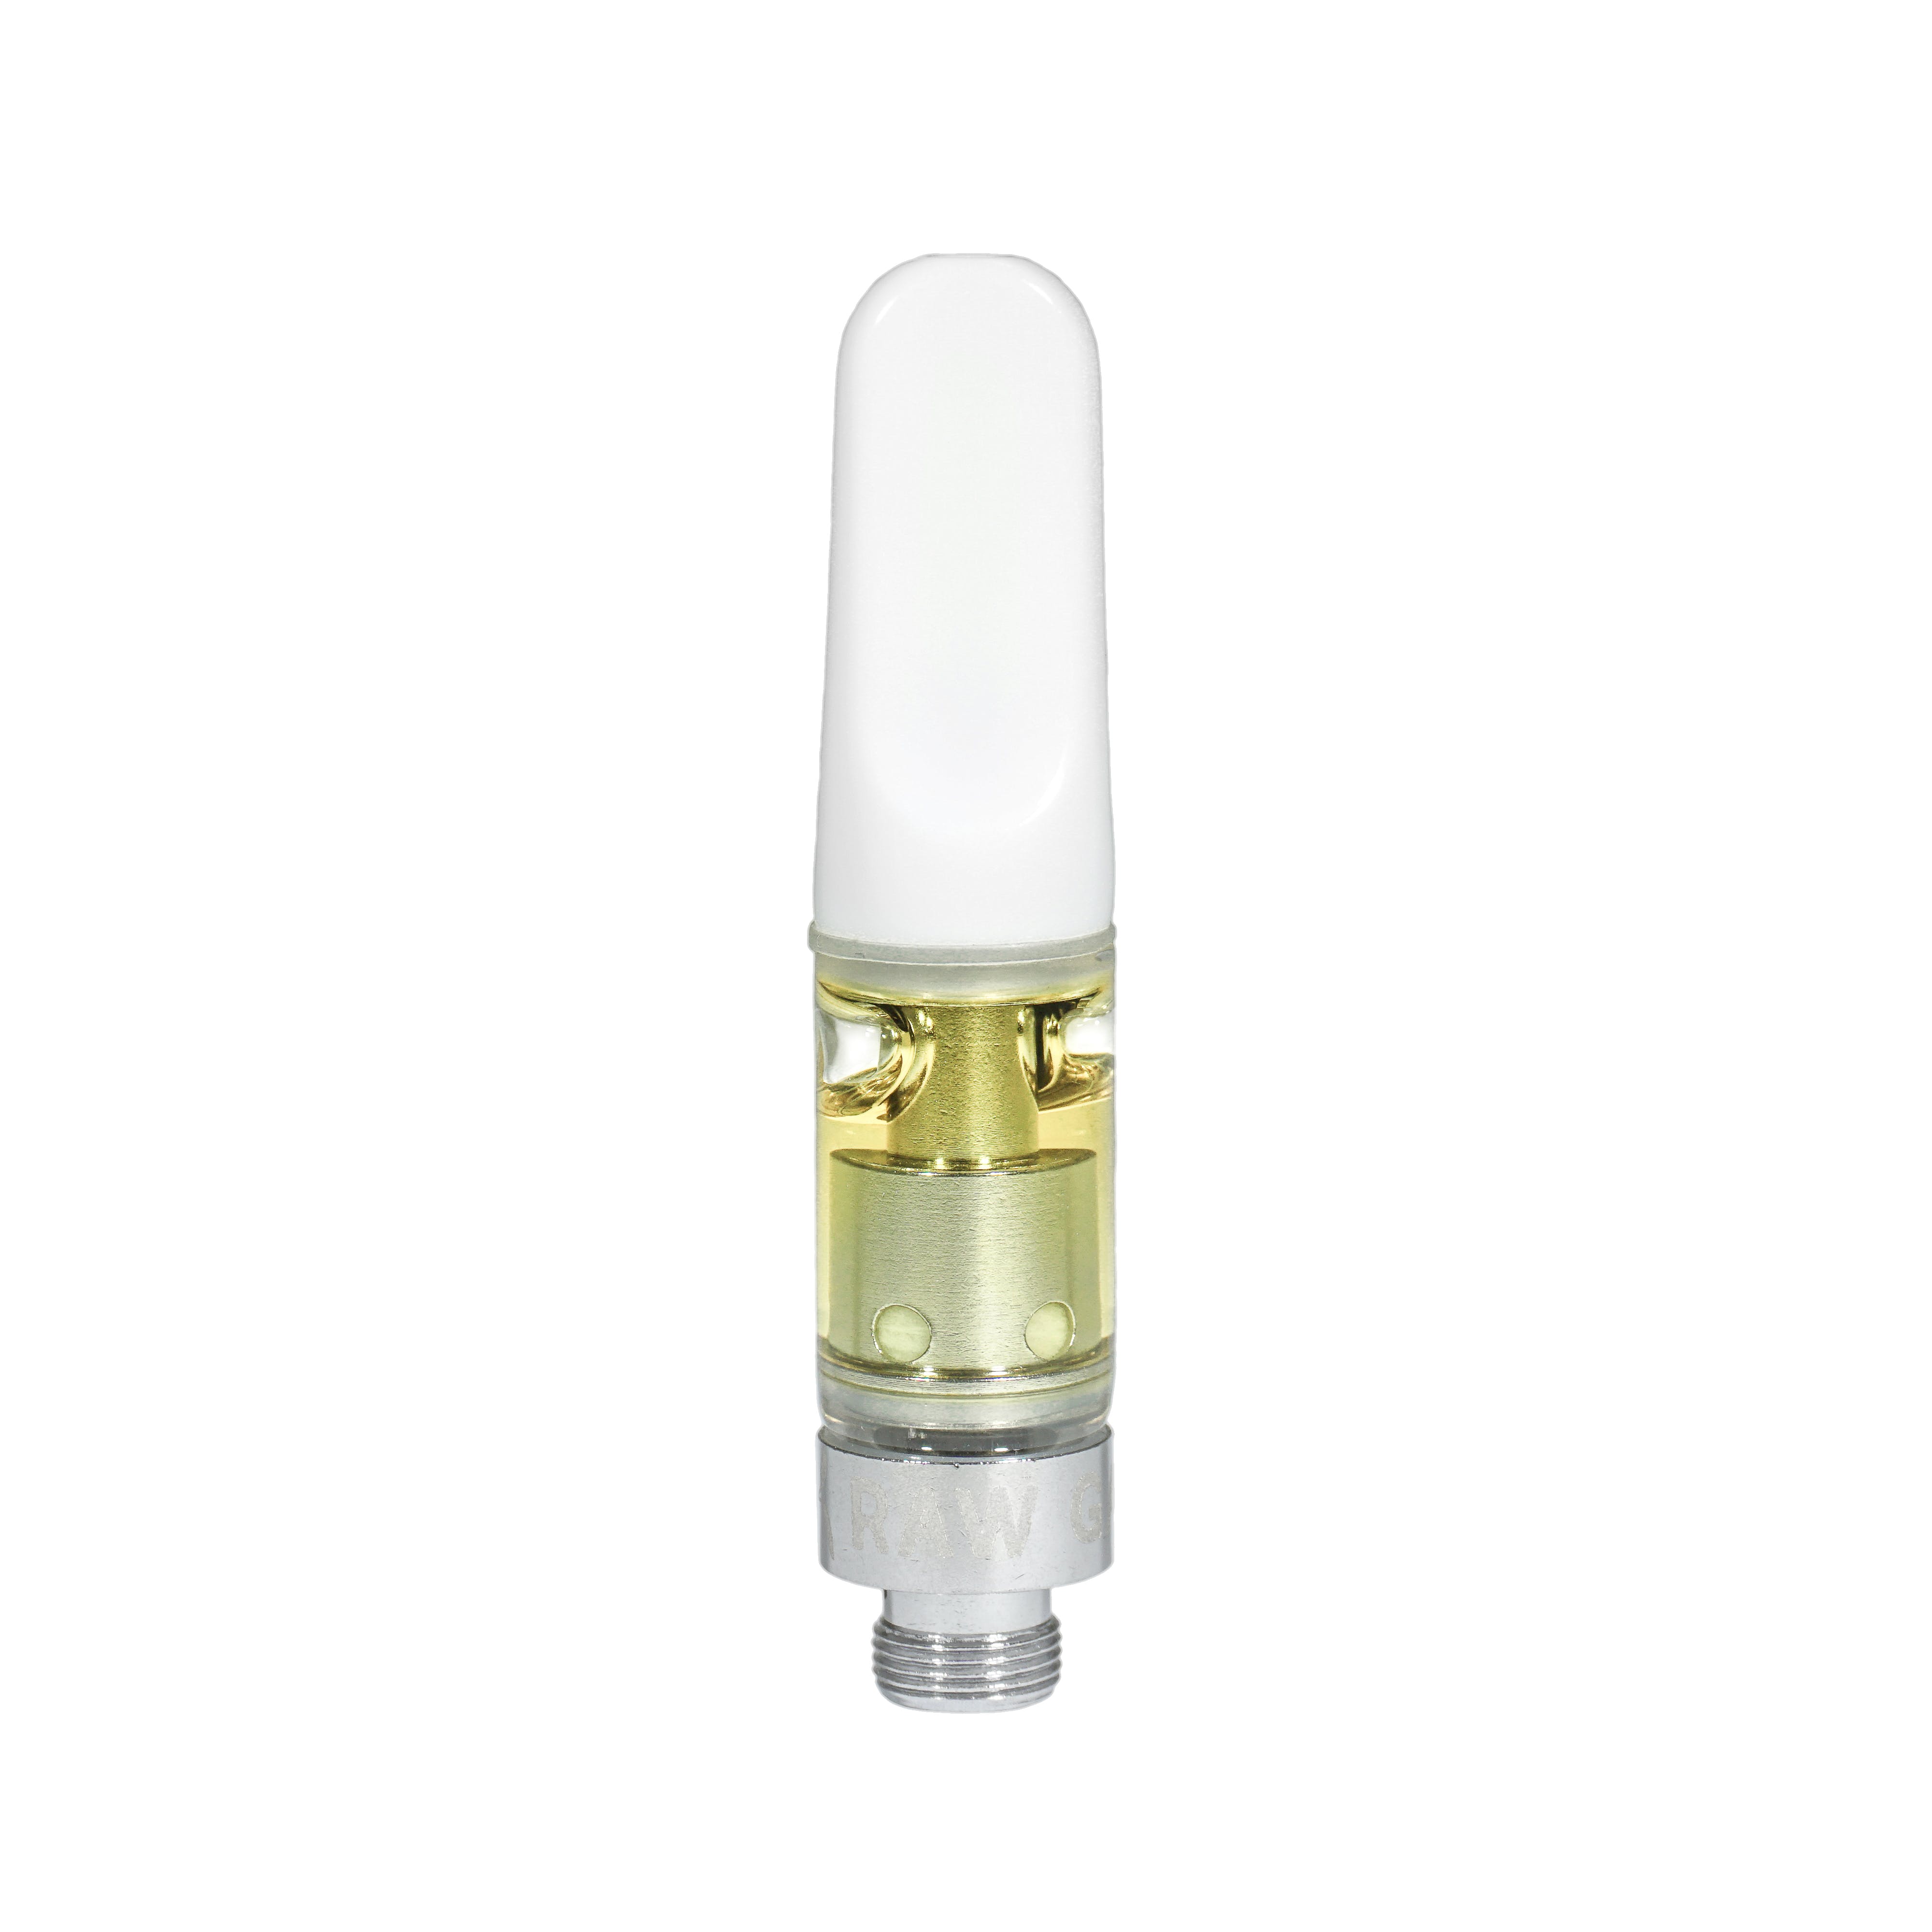 Extreme-Lee Fire 0.5g Cartridge